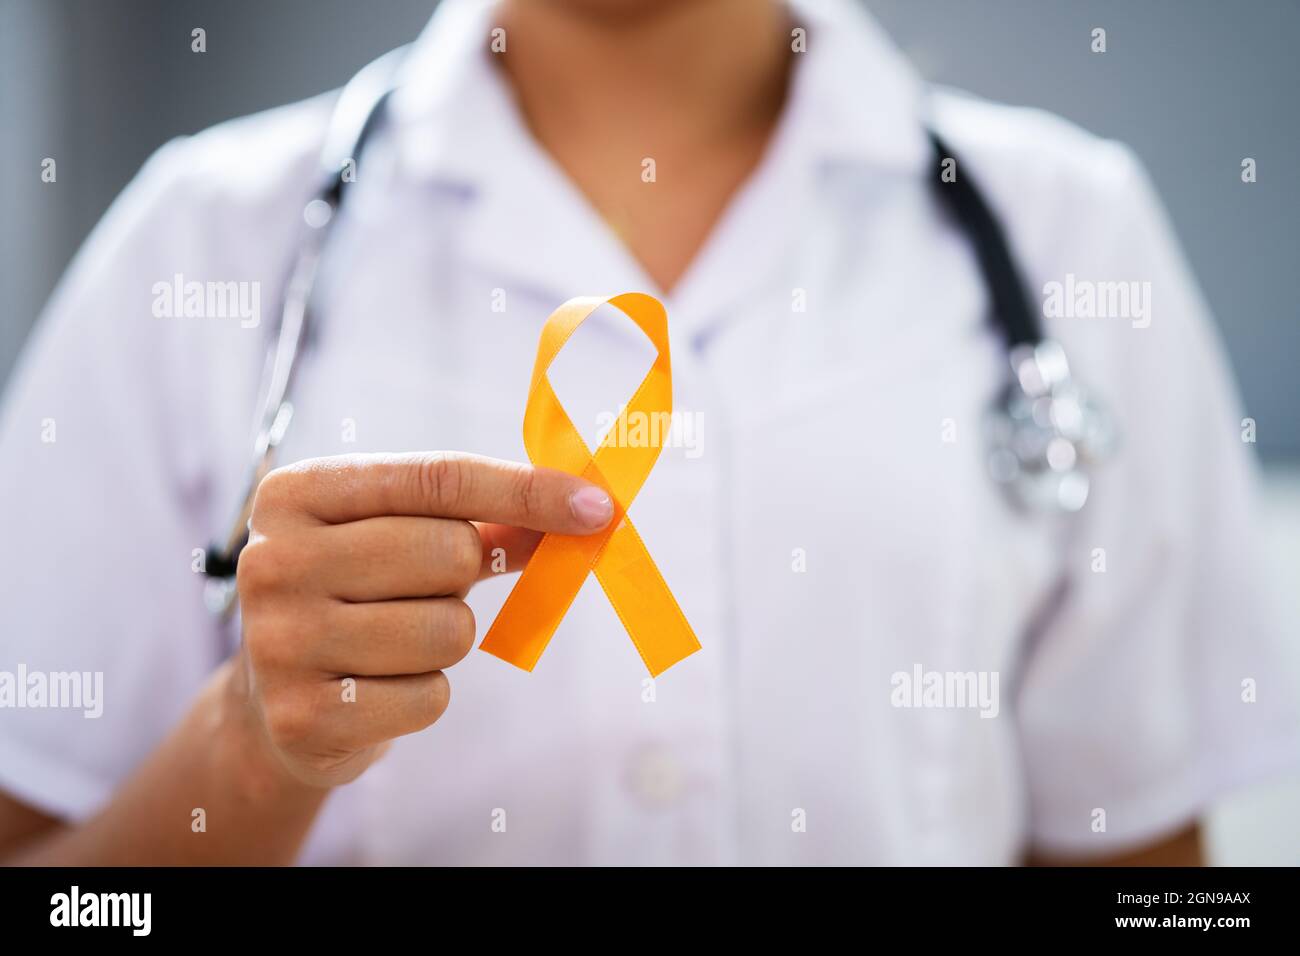 Female Doctor's Hand With Ribbon Showing Uterine Cancer Awareness Stock Photo